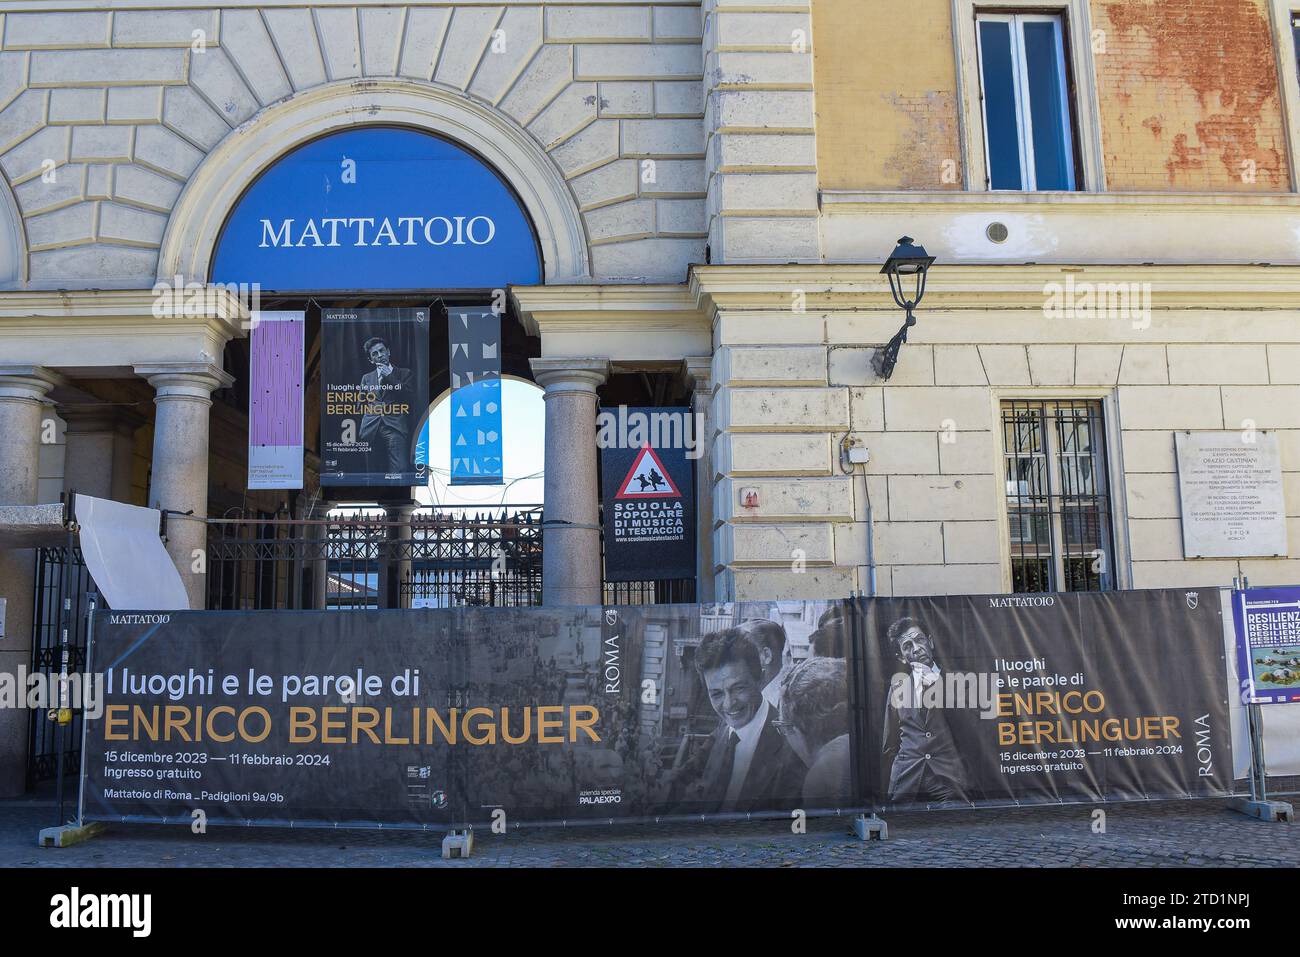 External view of the exhibition 'The places and words of Enrico Berlinguer', at the Mattatoio. The exhibition is dedicated to the figure of Enrico Berlinguer, one of the protagonists of Italian political history of the twentieth century and secretary of the Italian Communist Party from 1972 to 1984, for the centenary of his birth. (Photo by Vincenzo Nuzzolese / SOPA Images/Sipa USA) Stock Photo